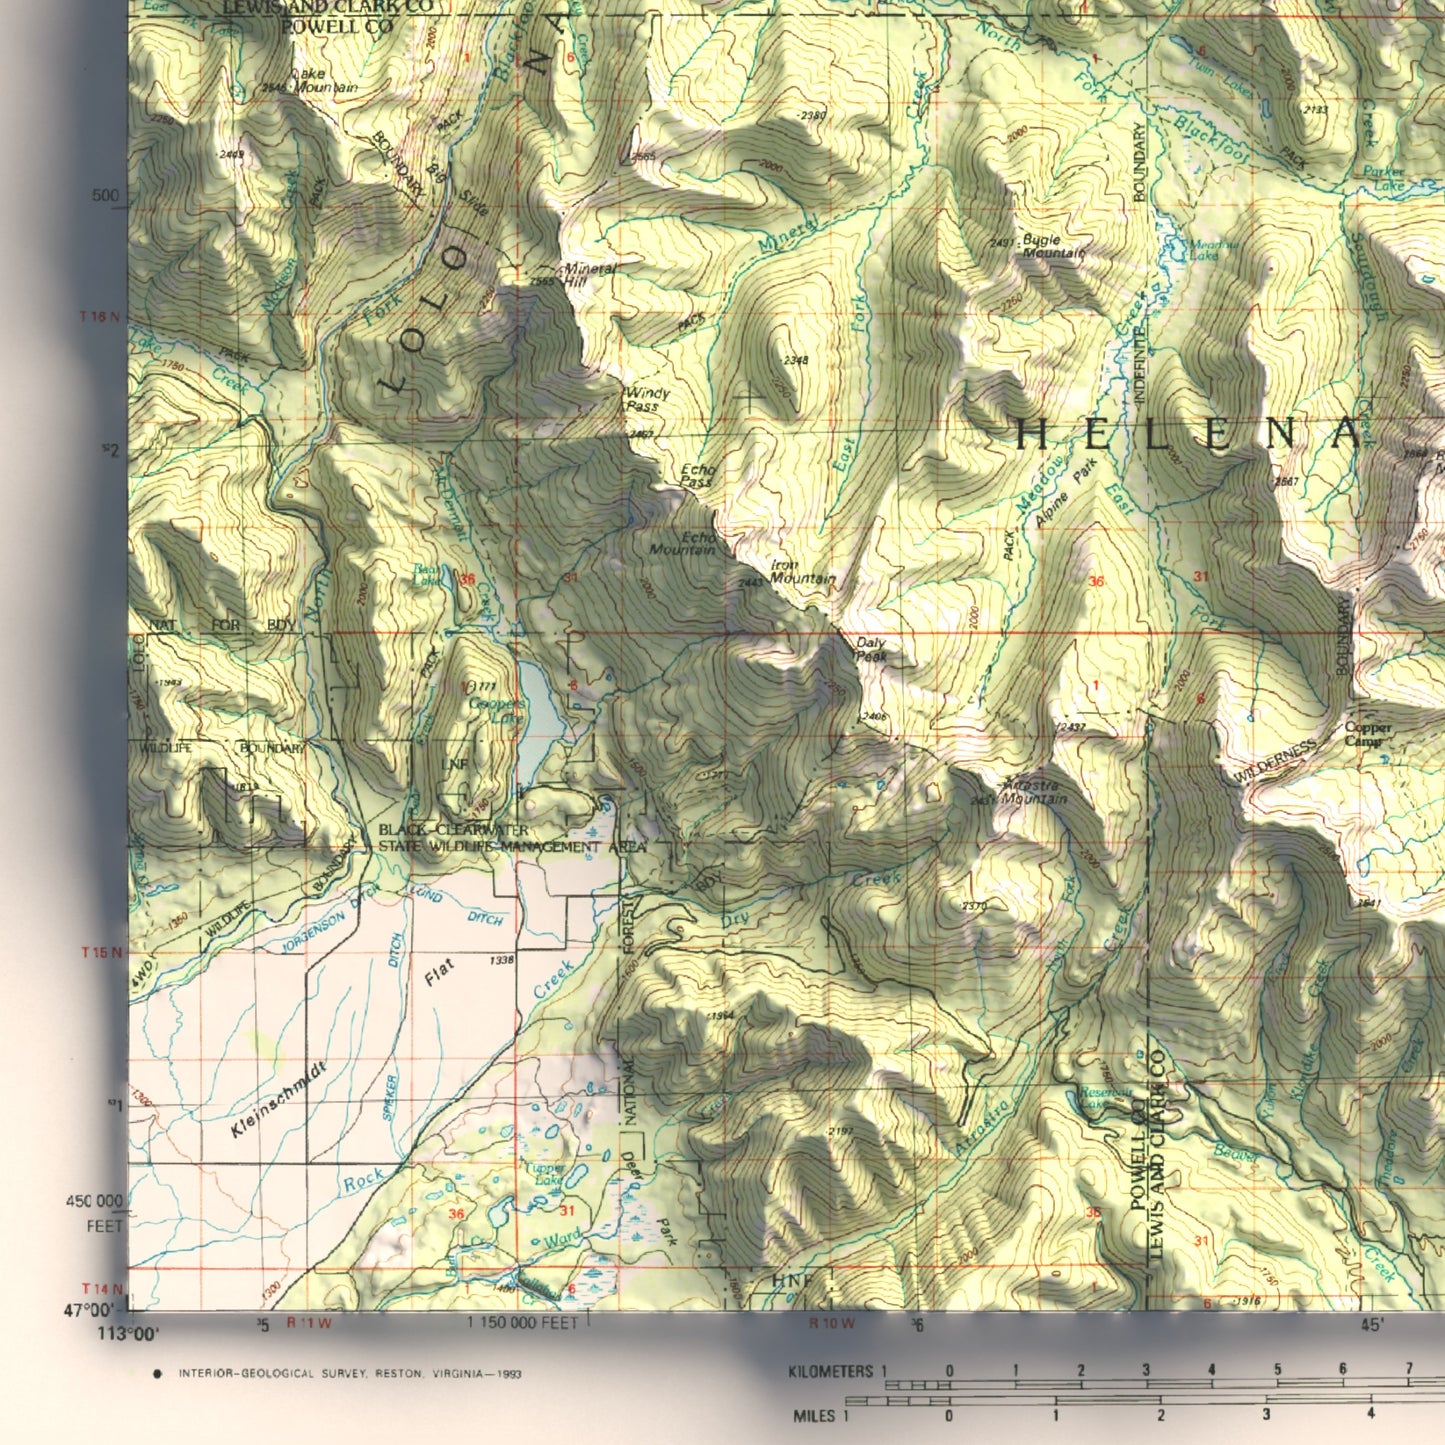 1993 Scapegoat Wilderness / Dearborn River, MT | 30'x60' Shaded Historic USGS Map